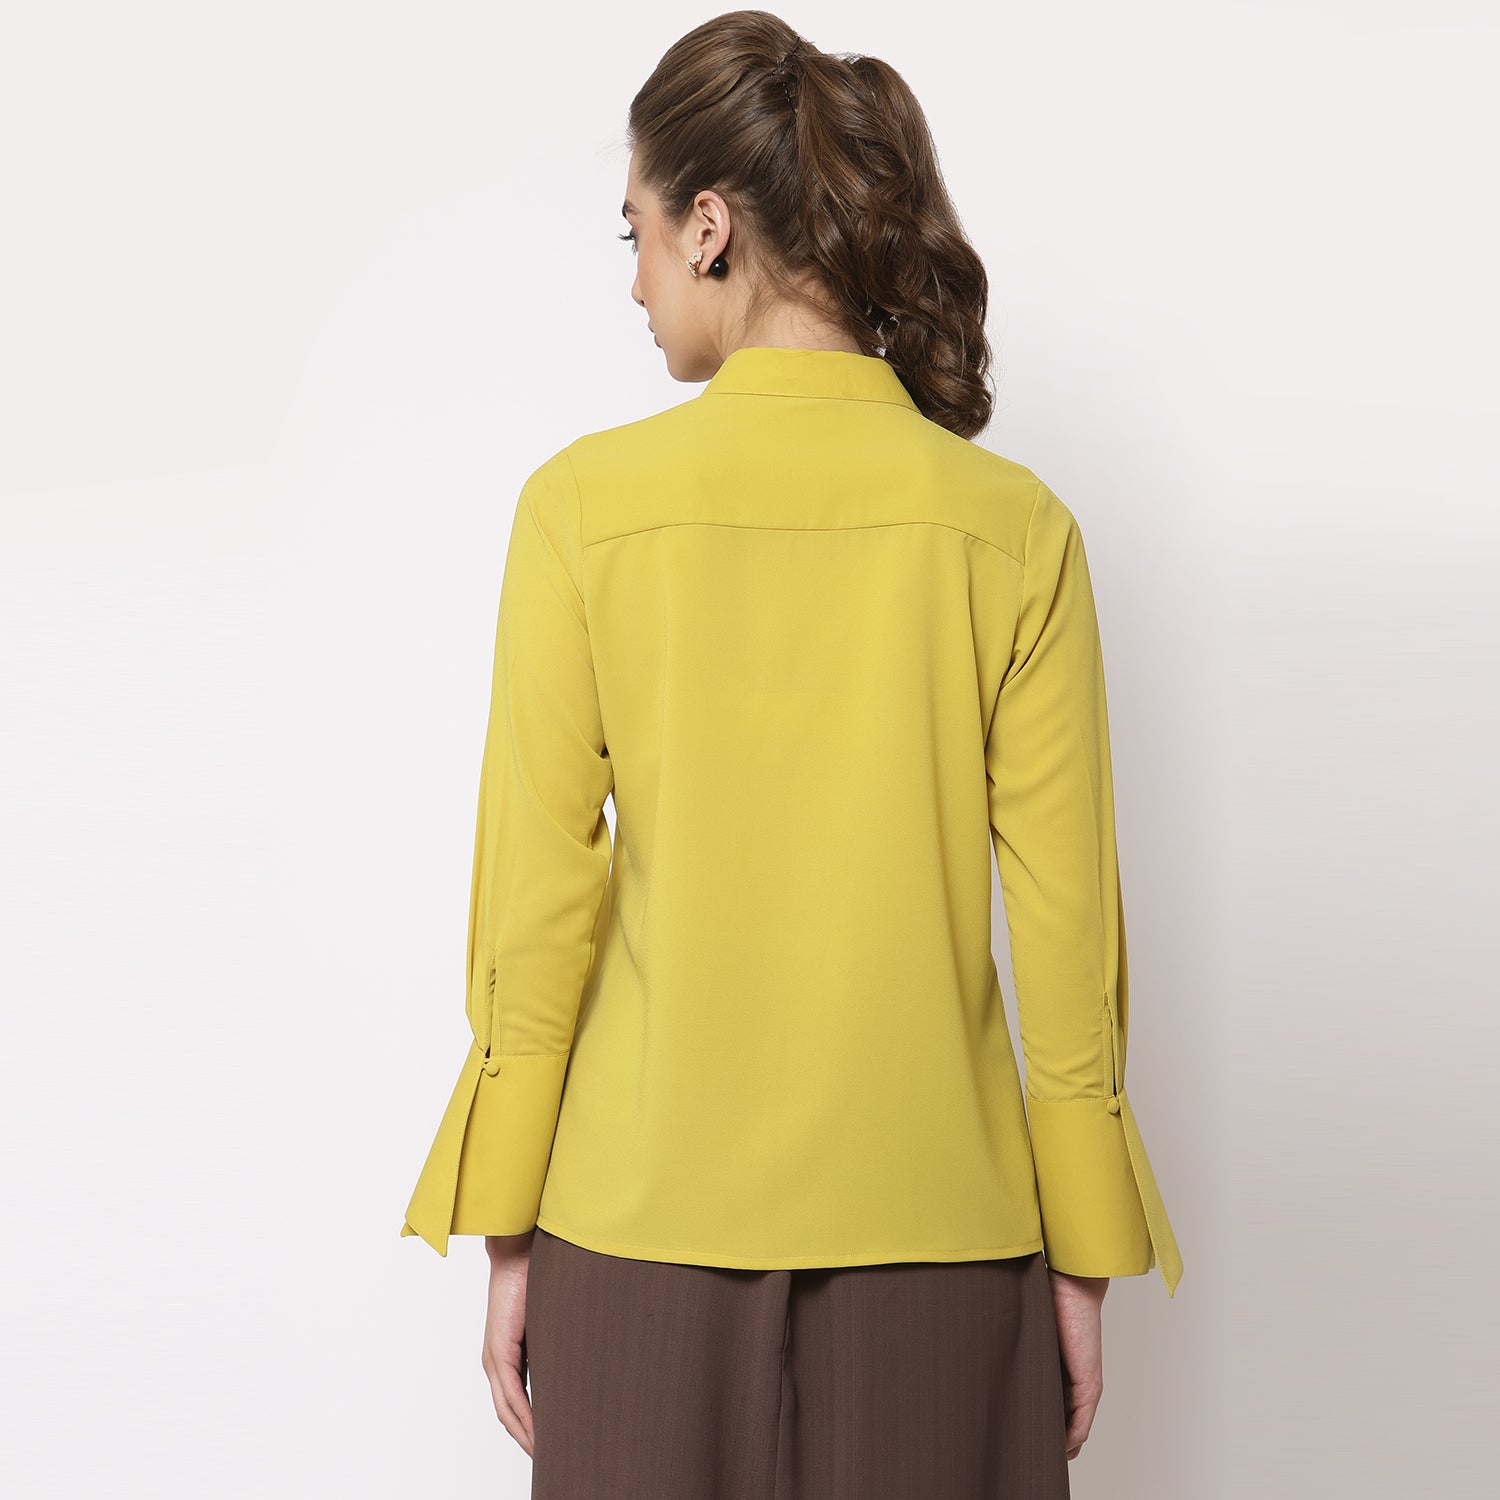 Yellow shirt with overlap cuff